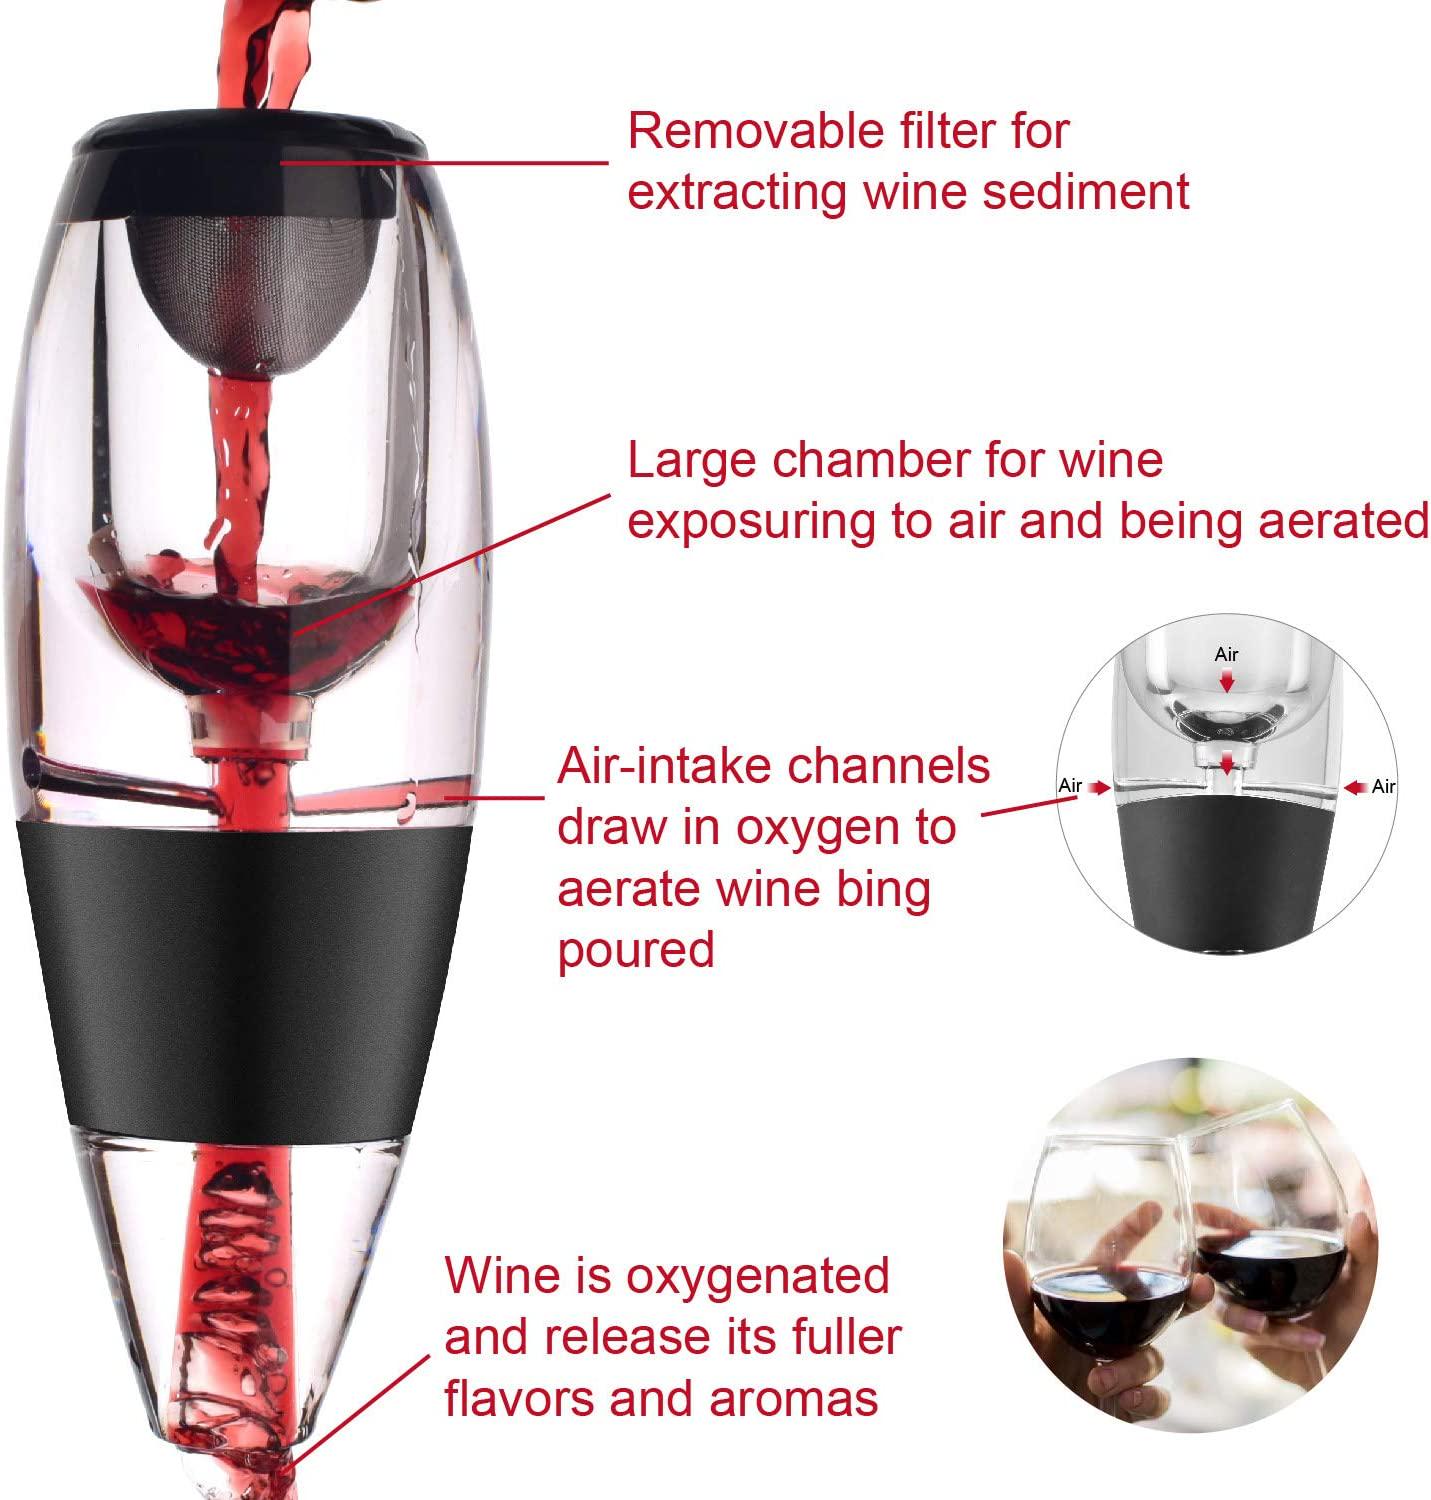 Mihao, Mihao Wine Aerator Decanter with Base for Red Wine for Birthday, Friendship, Wine Gift,Home use and Party